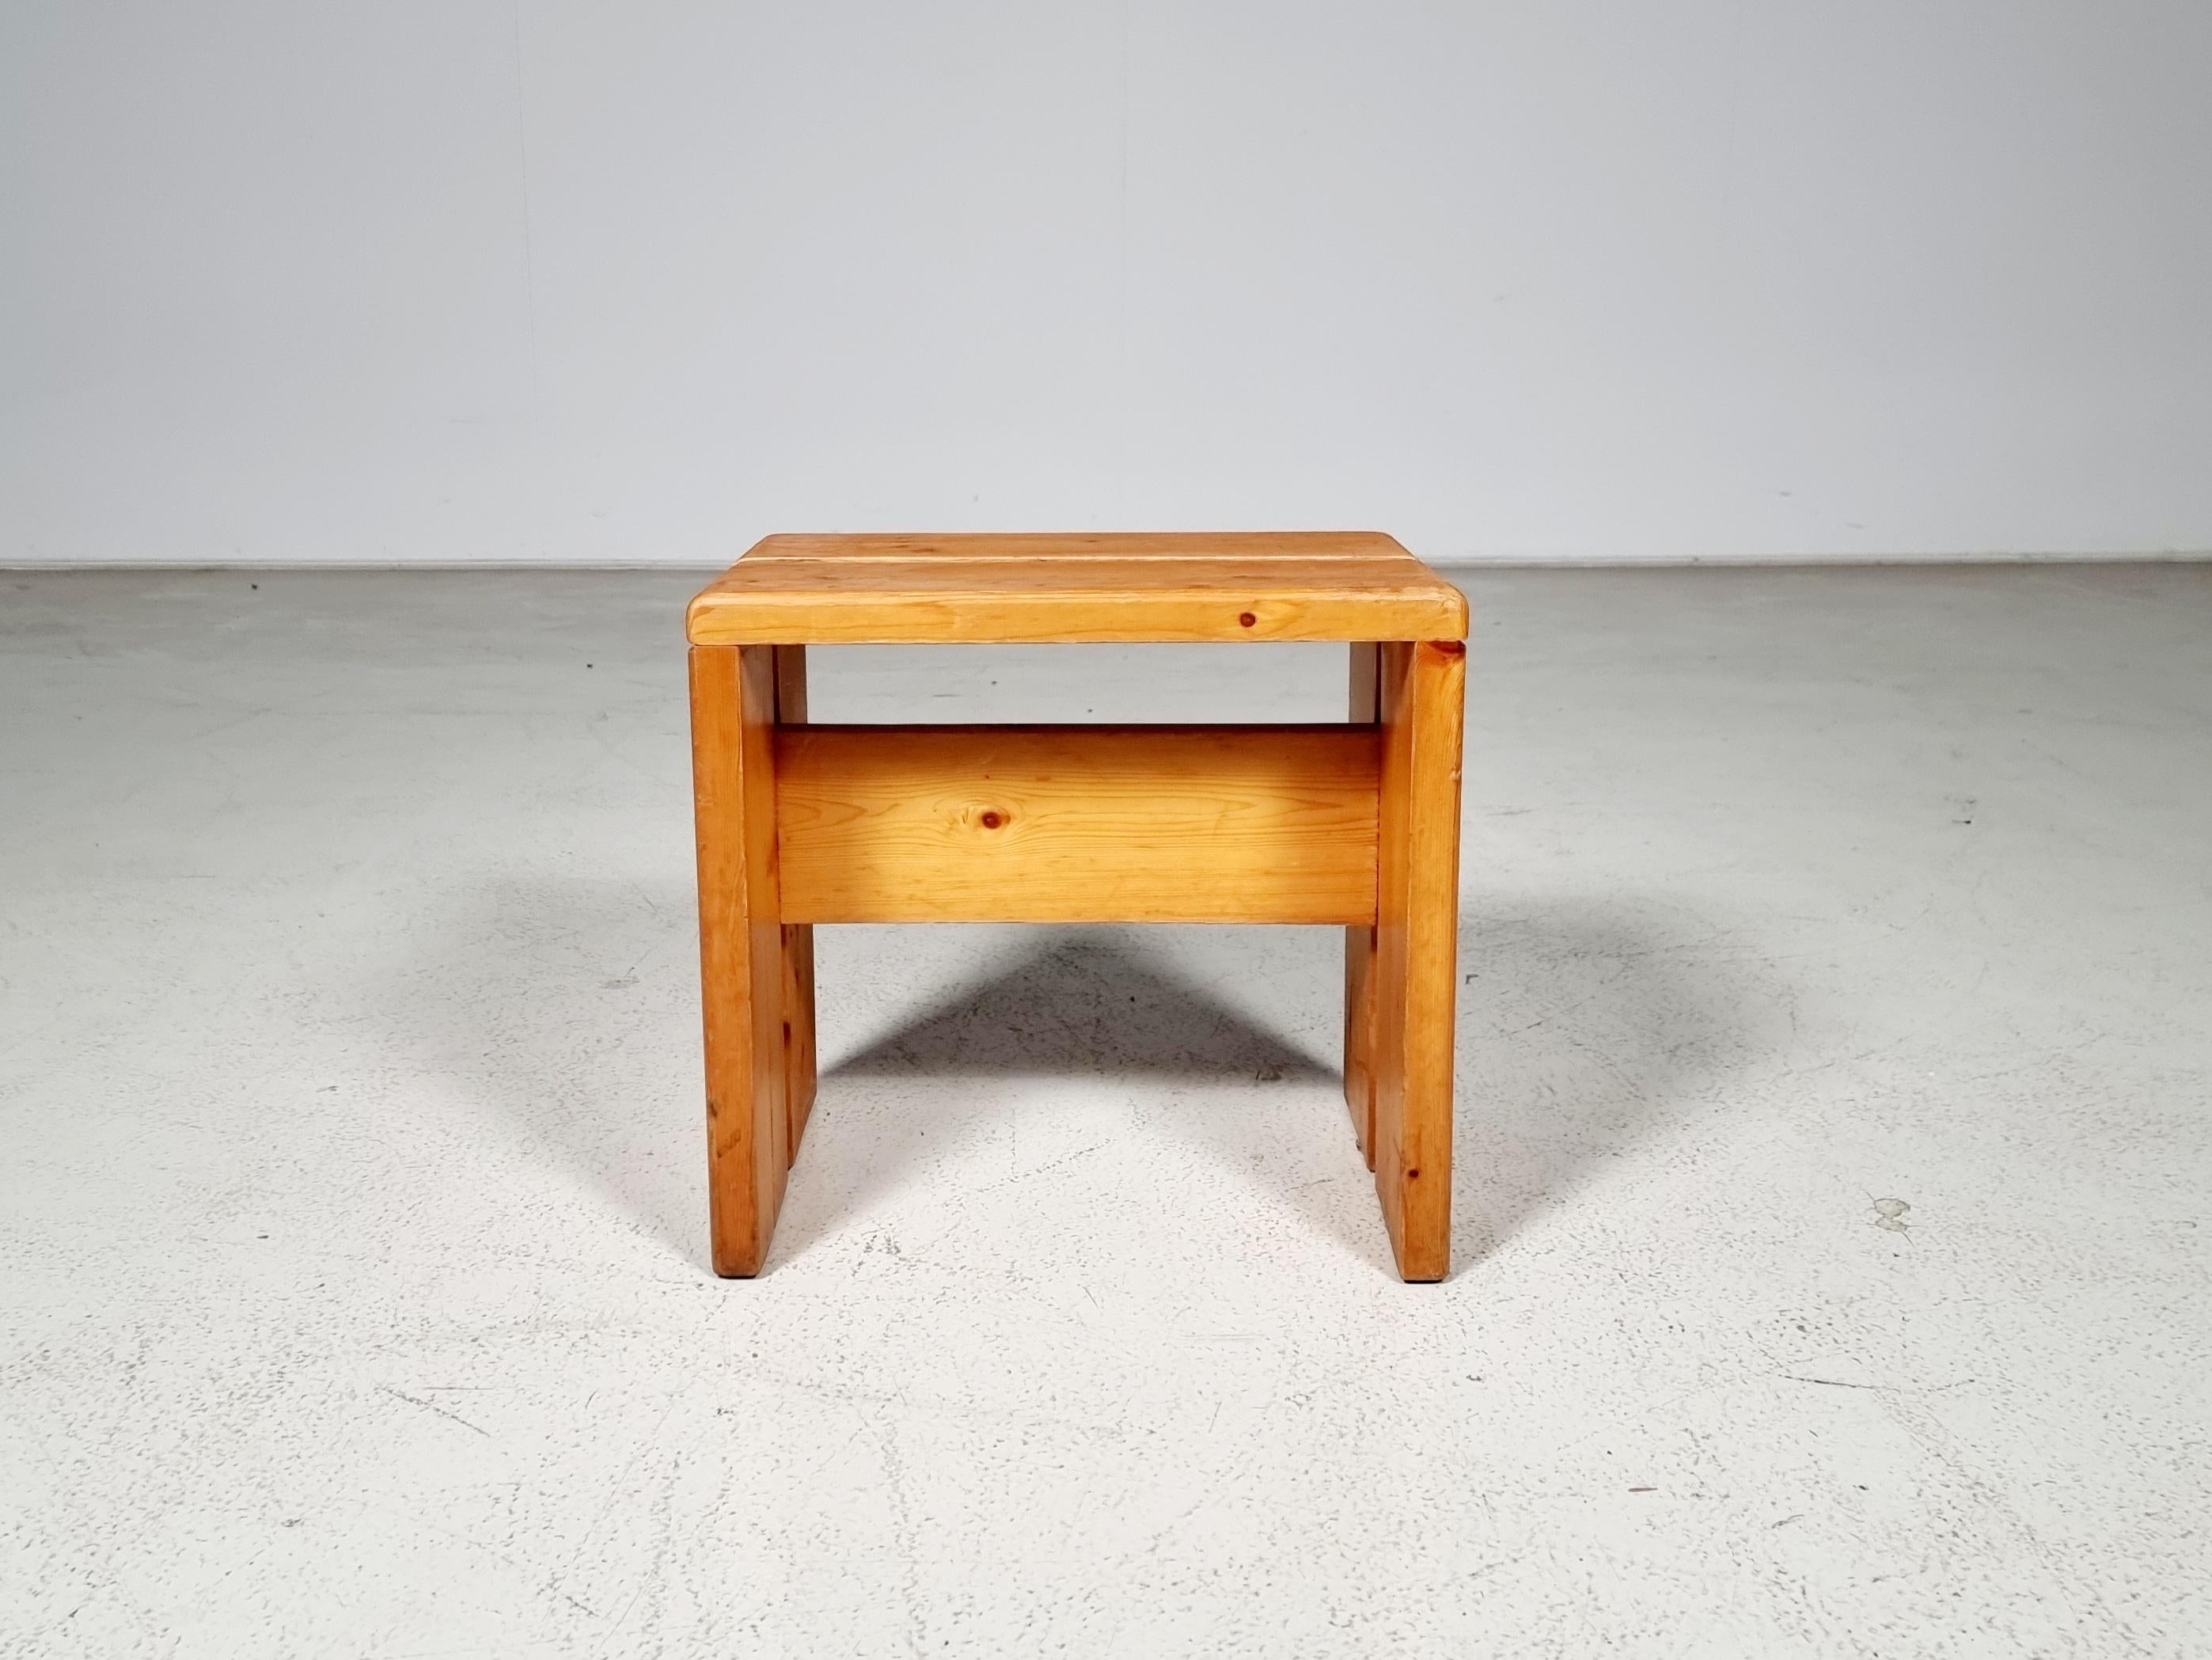 The pinewood stool is from the 1960s. Great lines and simplicity. Wooden cross brace under the seat and two pine studs in the stool's seat for added strength and support.